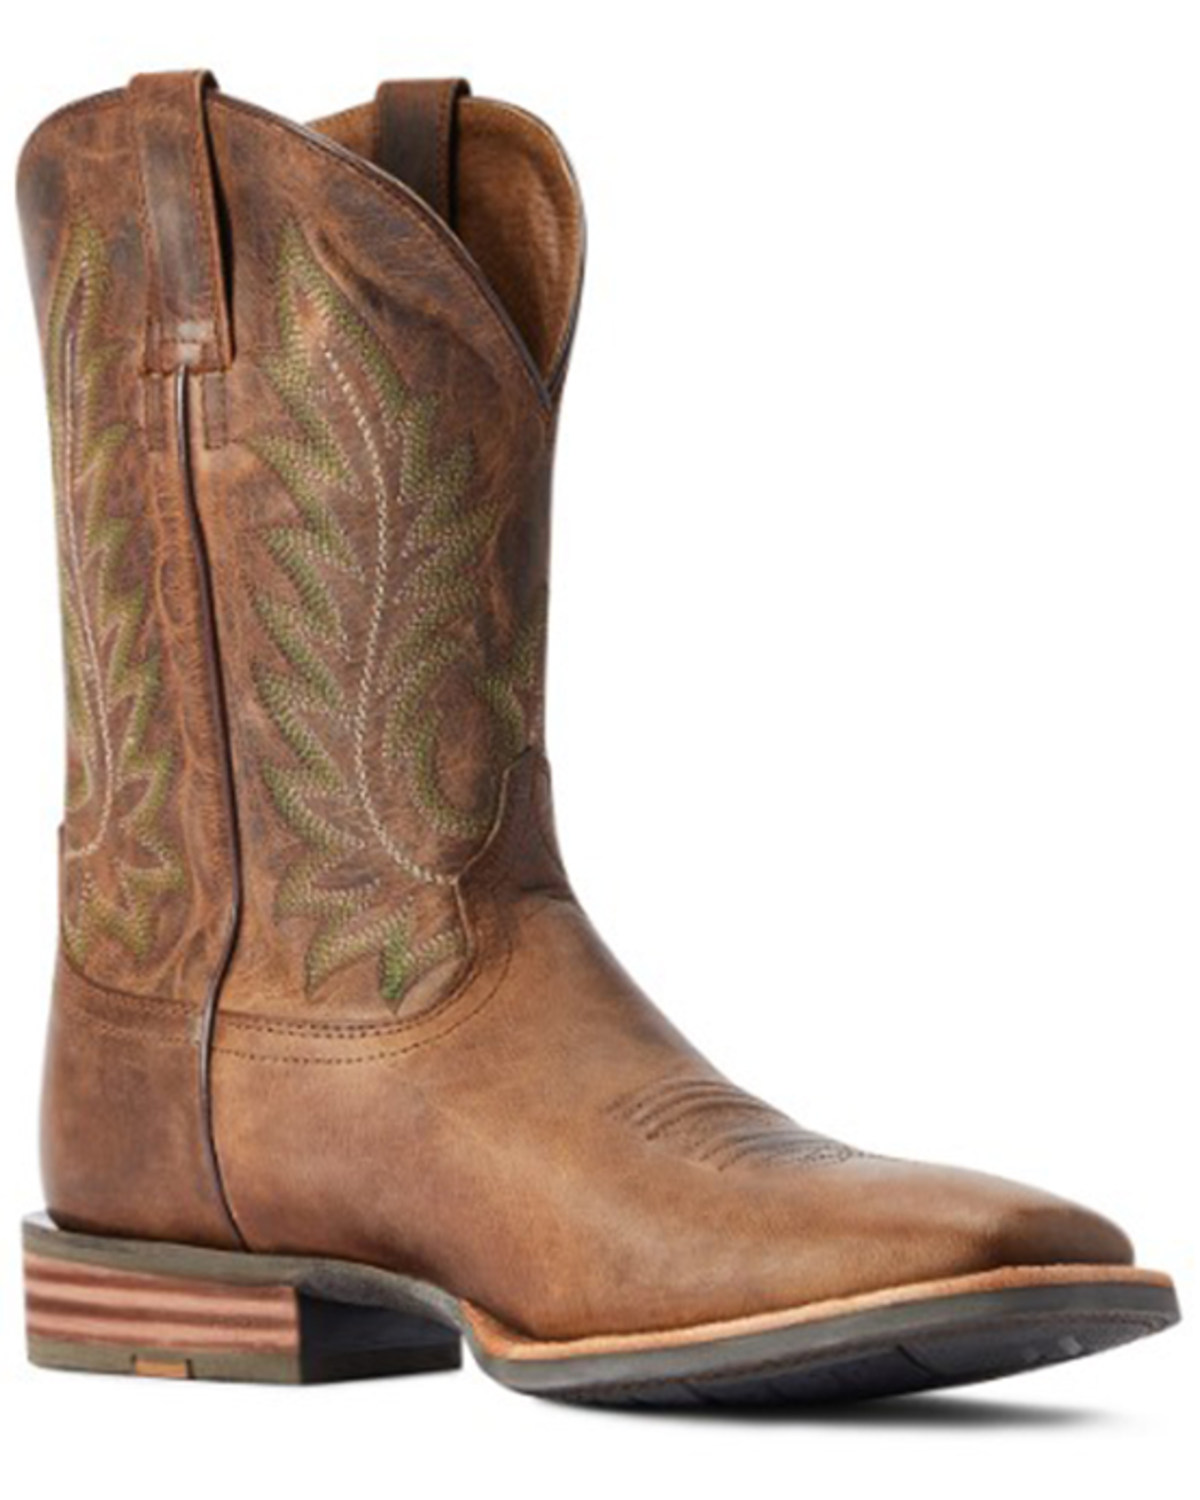 Ariat Men's Ridin' High Western Performance Boots - Broad Square Toe